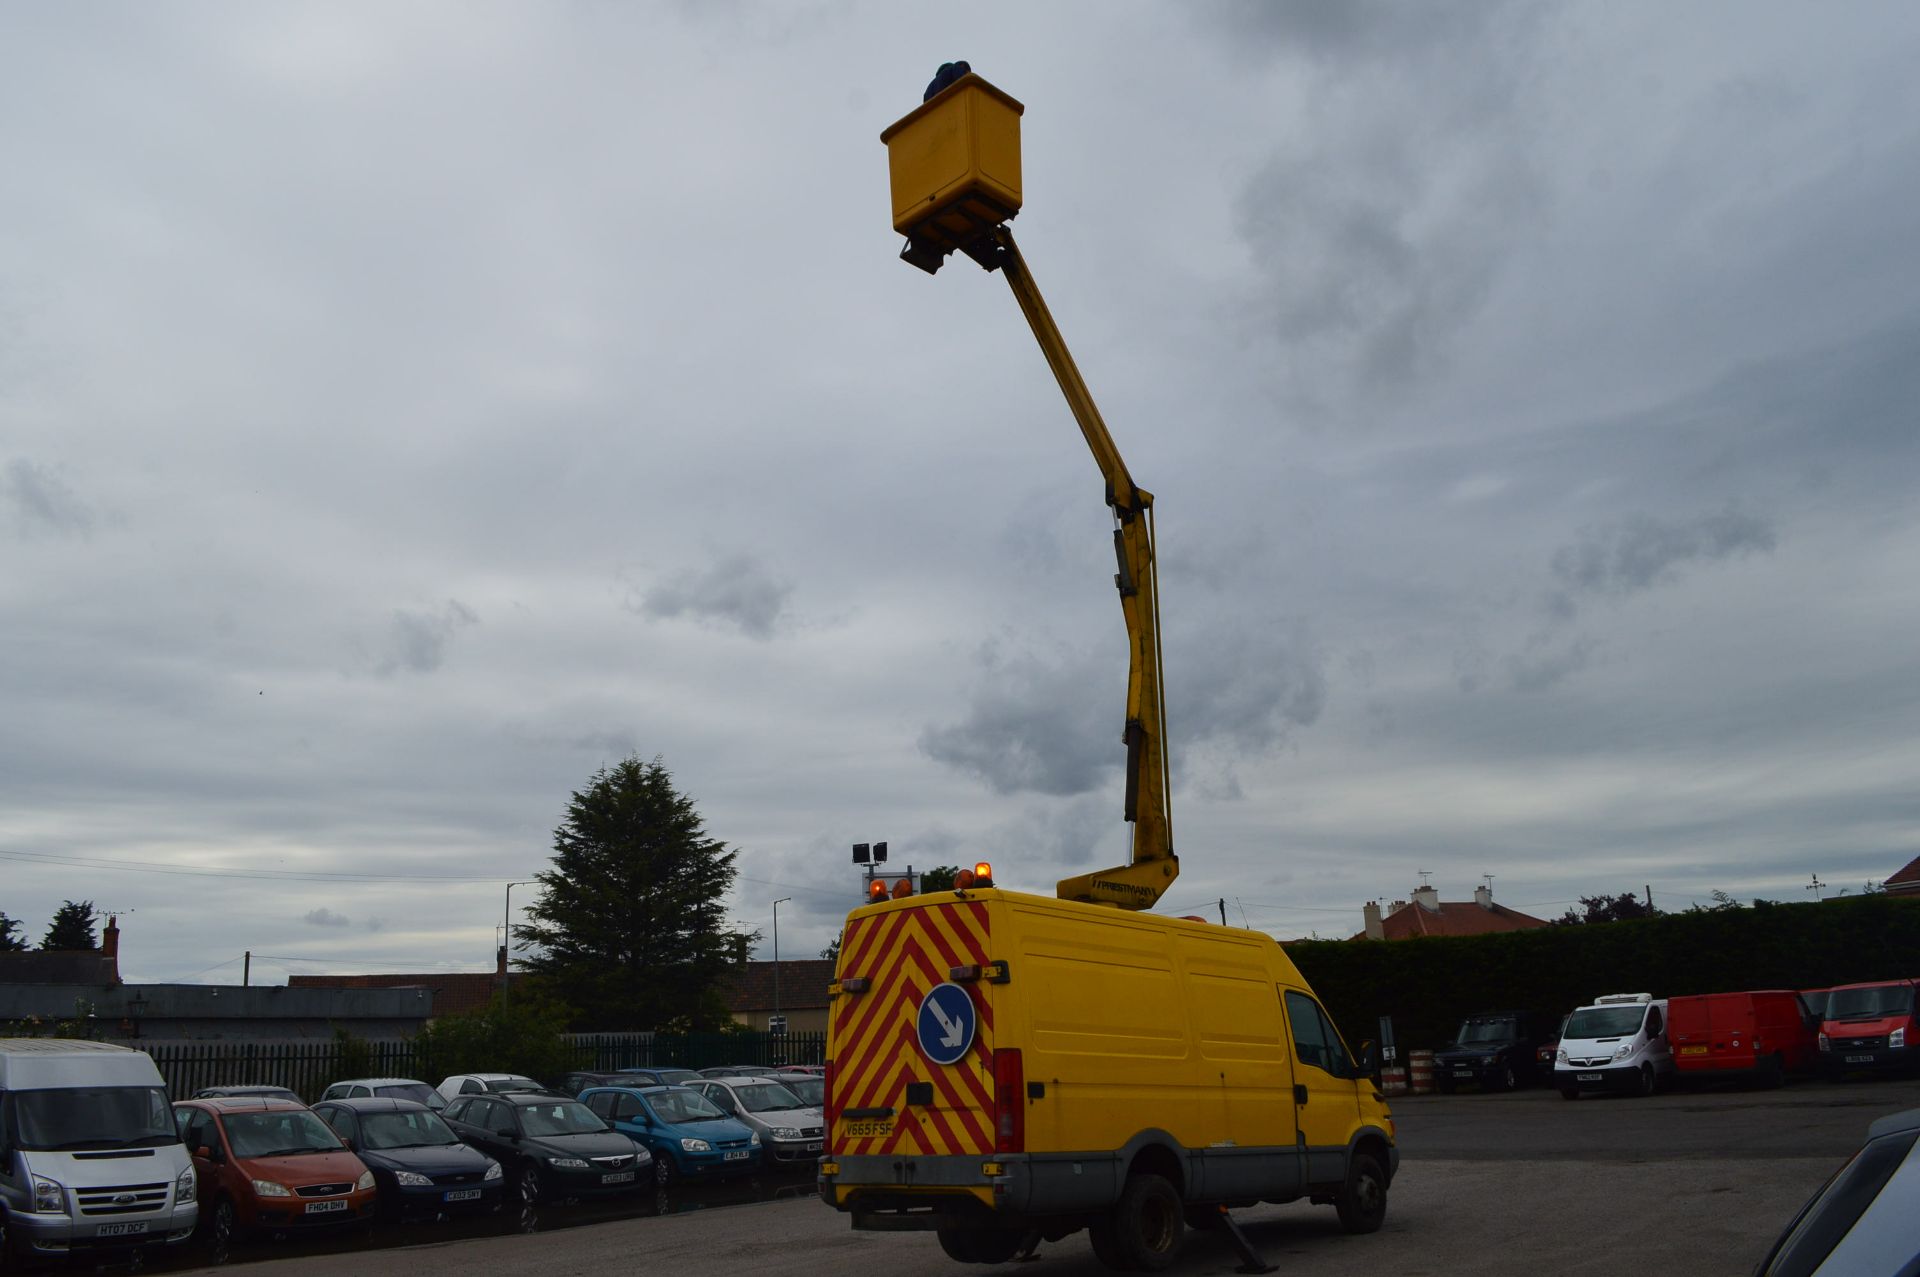 CHERRY PICKER 2000/V REG IVECO-FORD DAILY 2000 50C11 - 1 FORMER KEEPER - Image 21 of 24